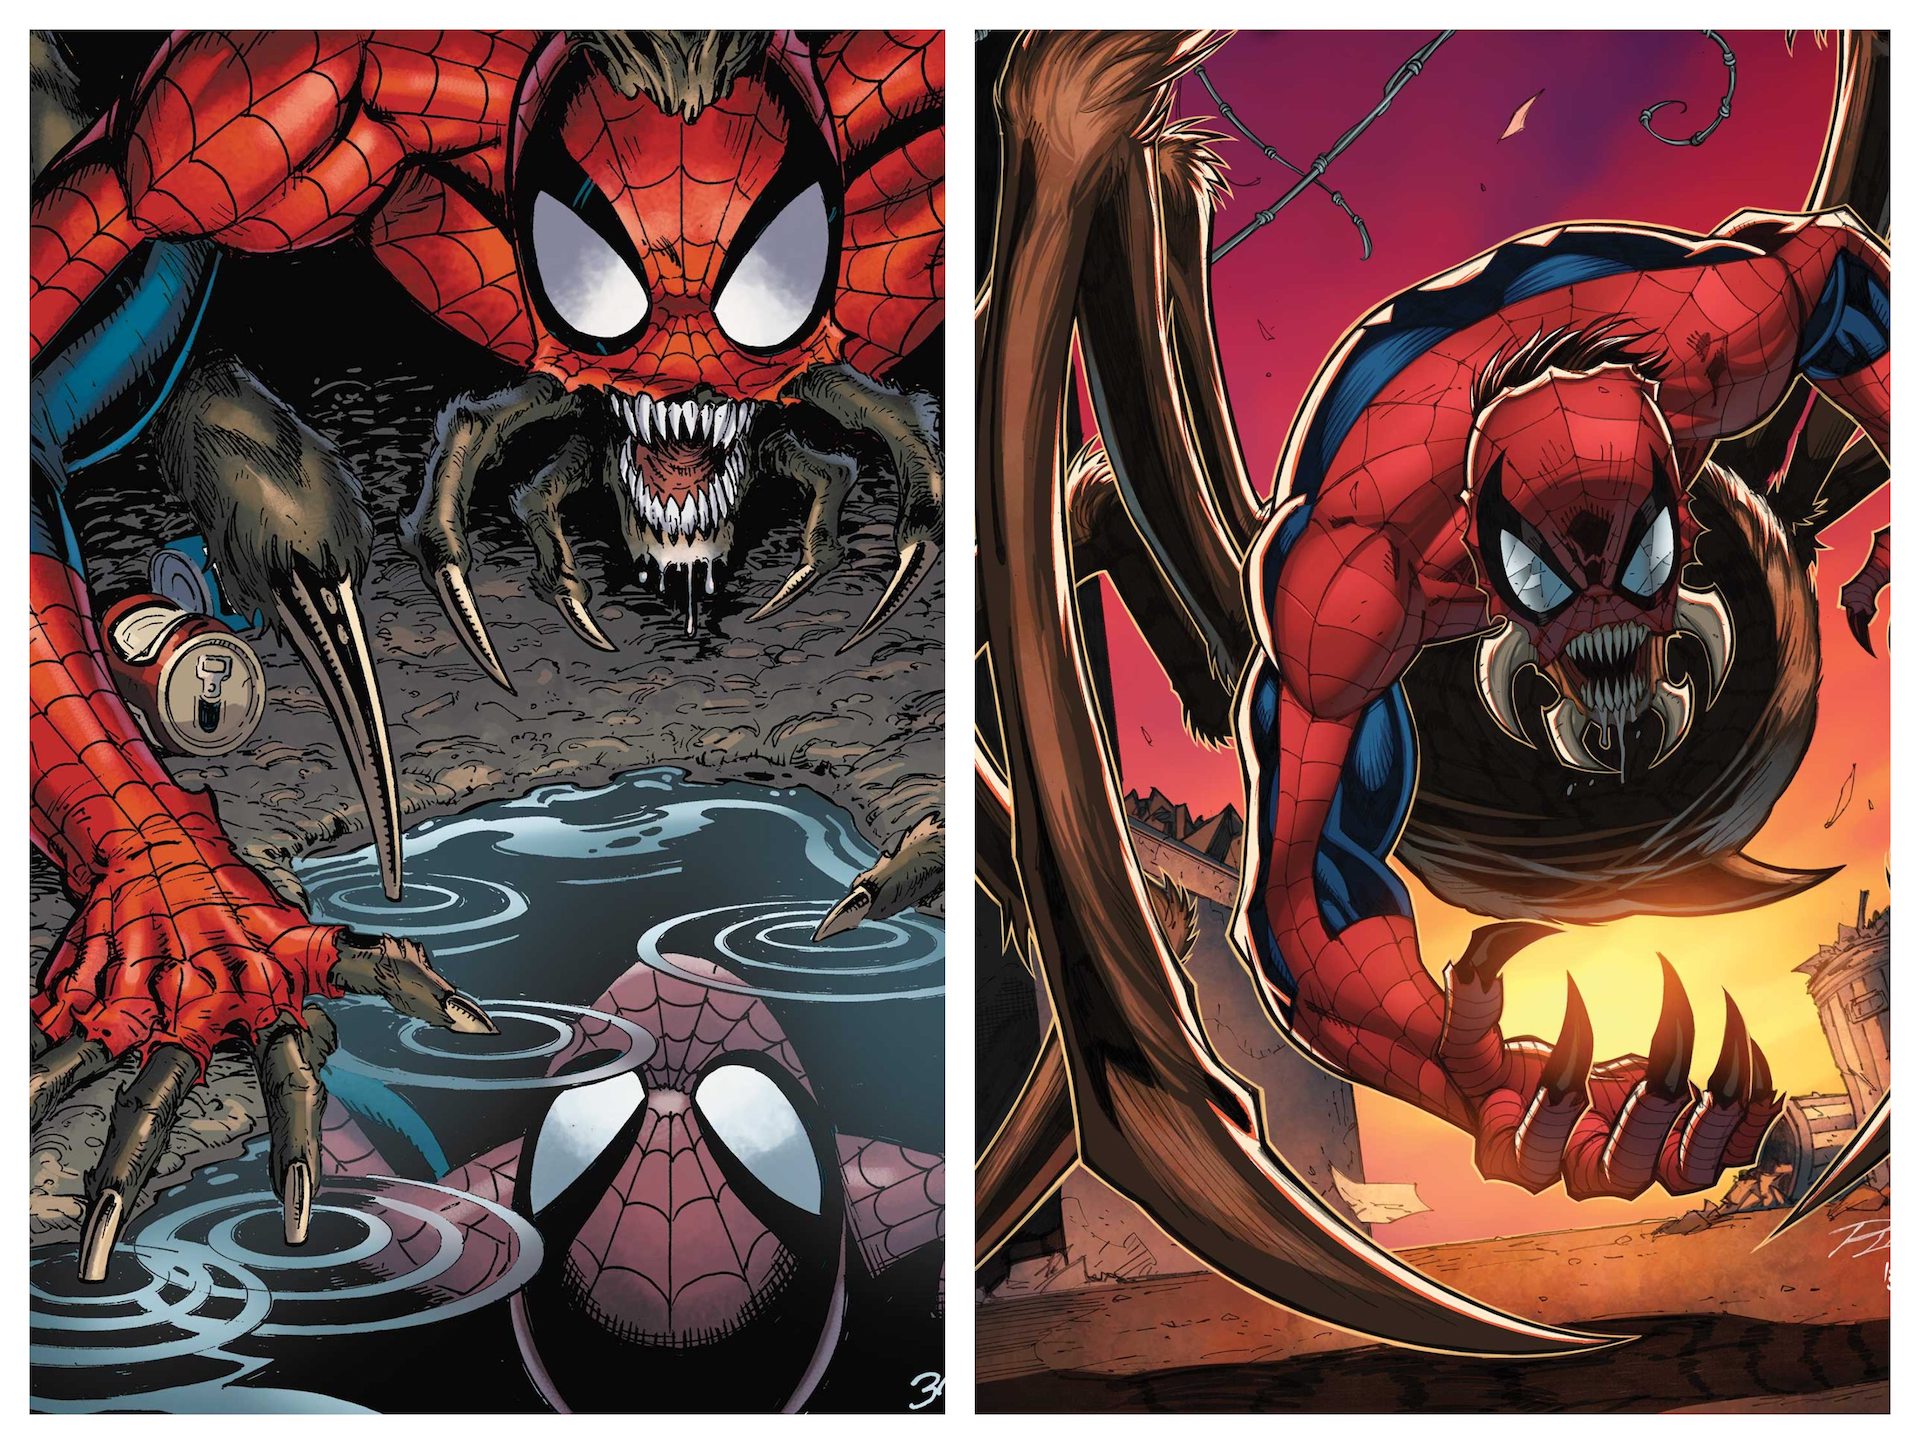 Marvel gives new glimpse of 'Savage Spider-Man' with new covers